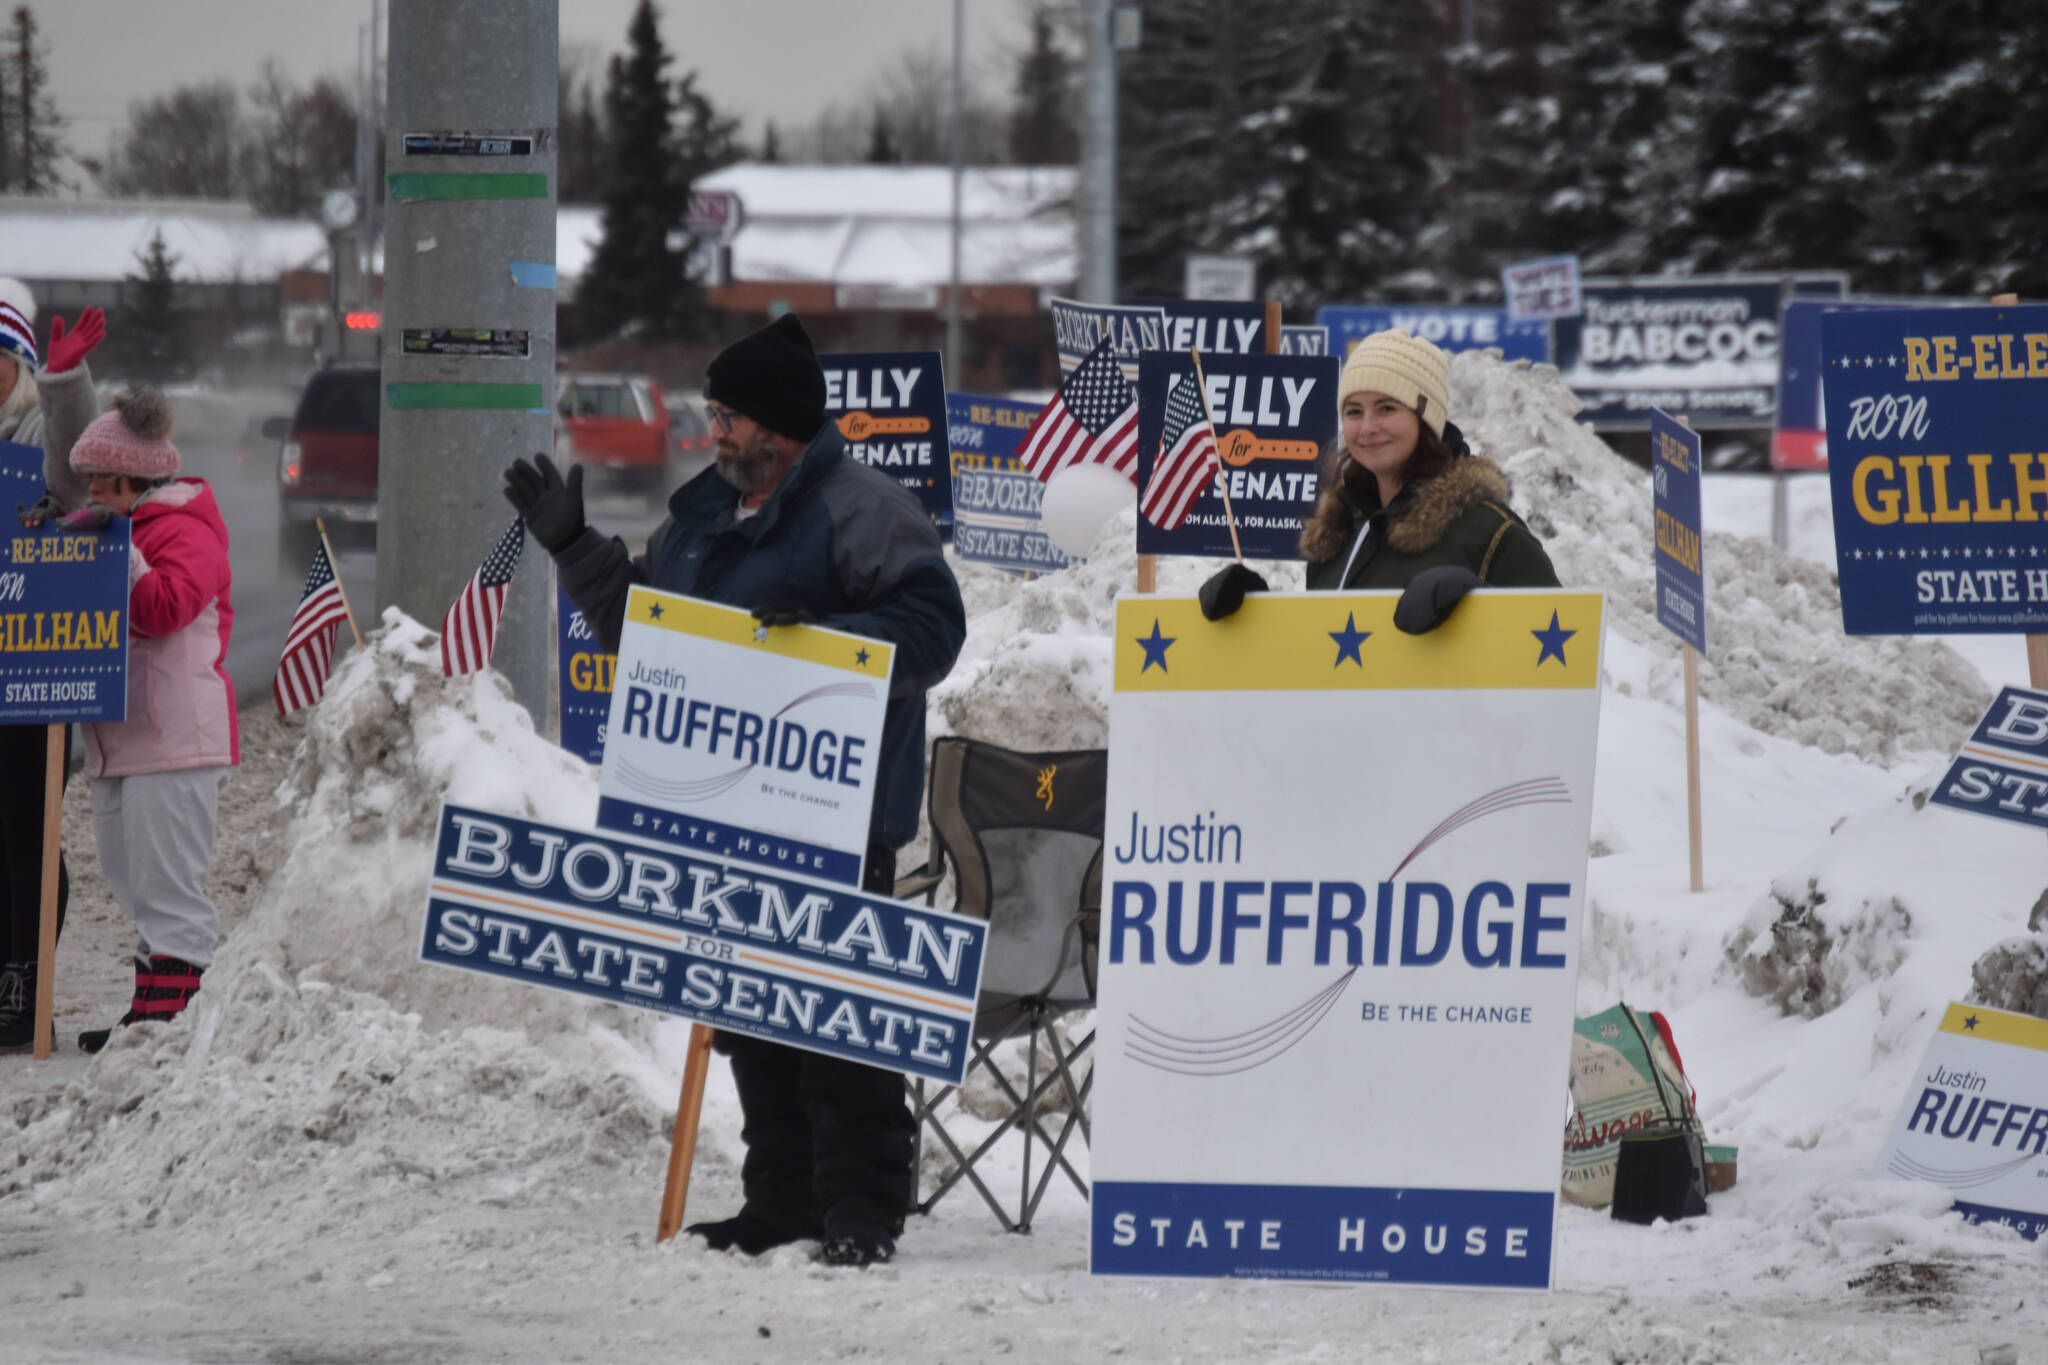 Michael O’Rourke and another supporter wave signs for Justin Ruffridge on Election Day, Nov. 8, 2022, in Kenai, Alaska. (Jake Dye/Peninsula Clarion)